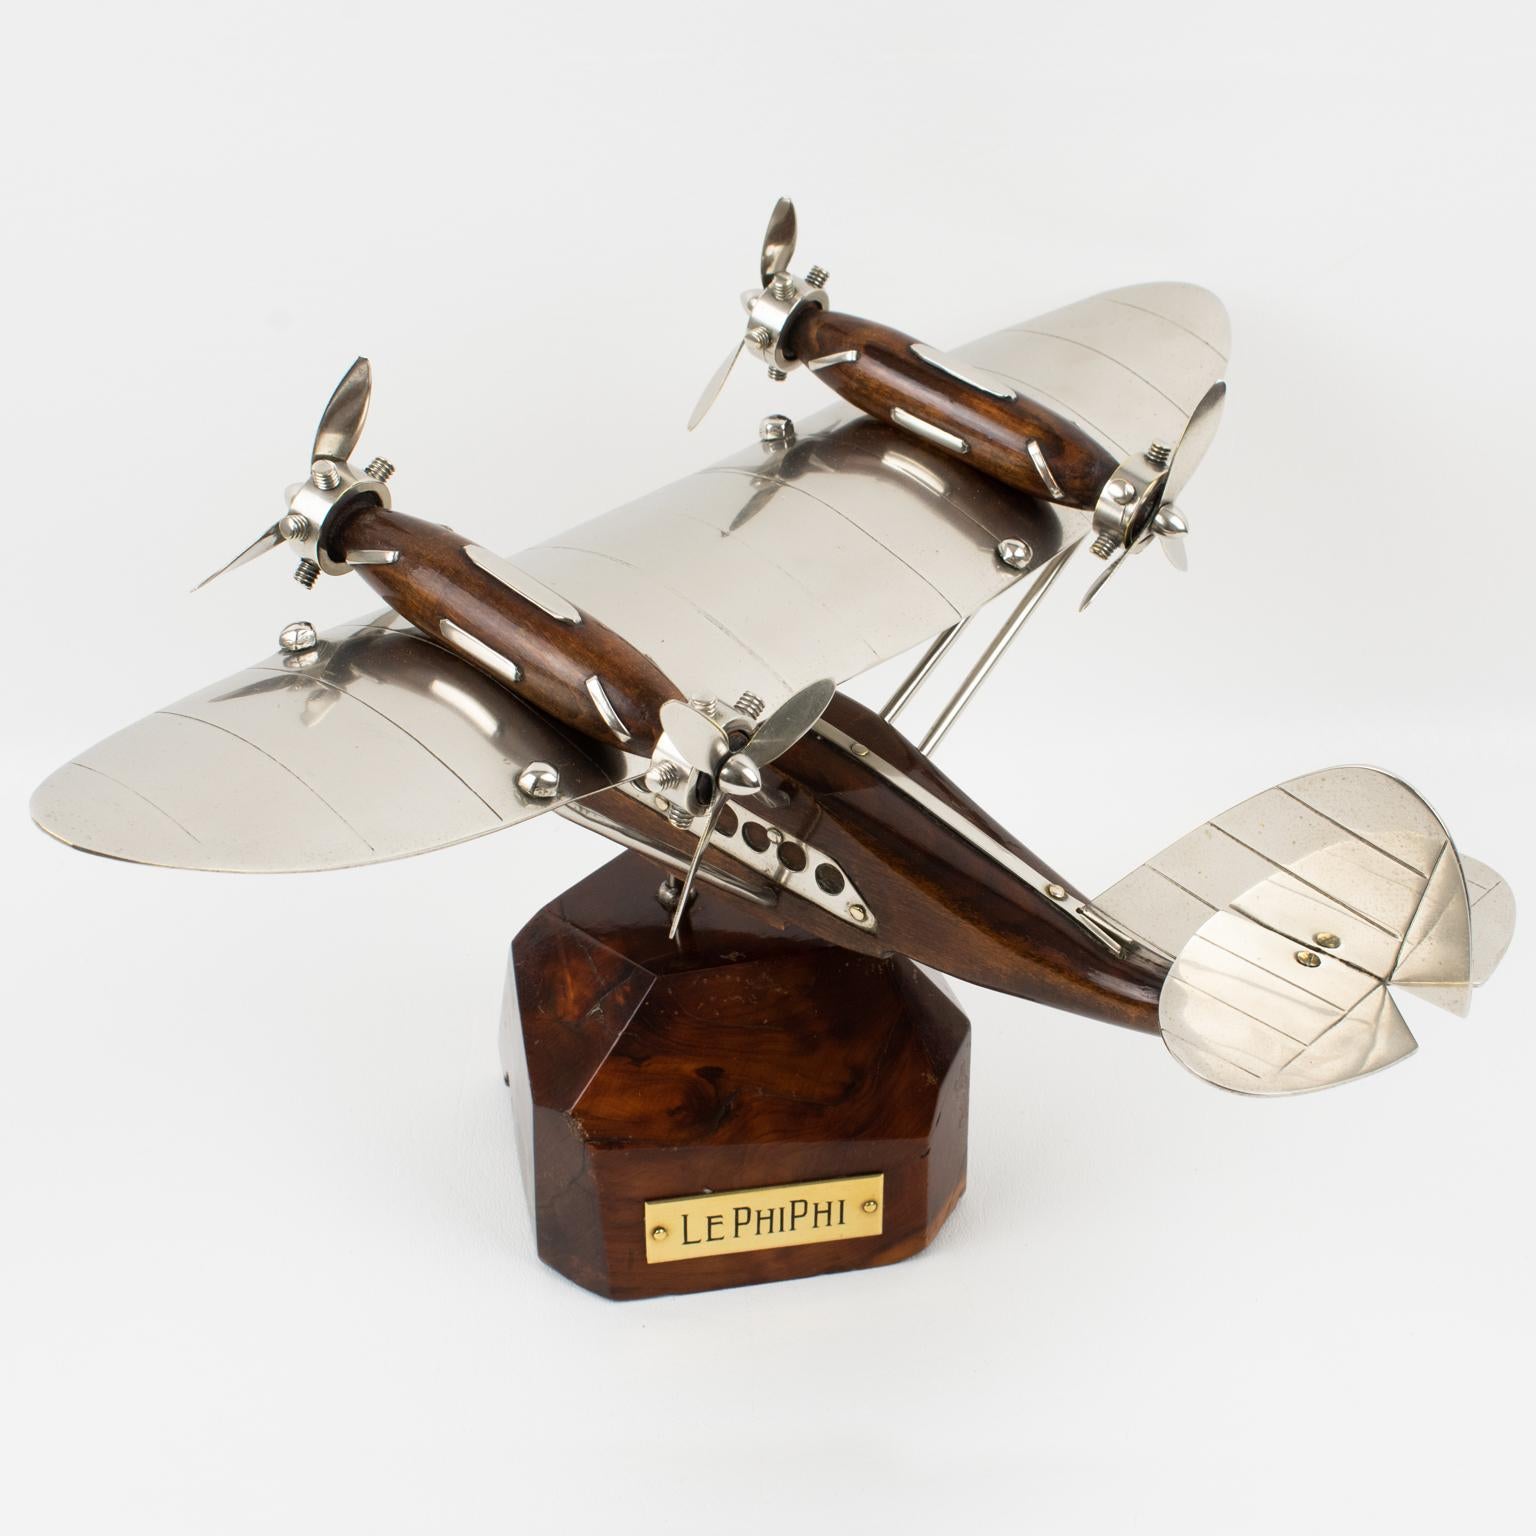 French Art Deco Wood and Chrome Airplane SeaPlane Aviation Model, 1940s For Sale 1